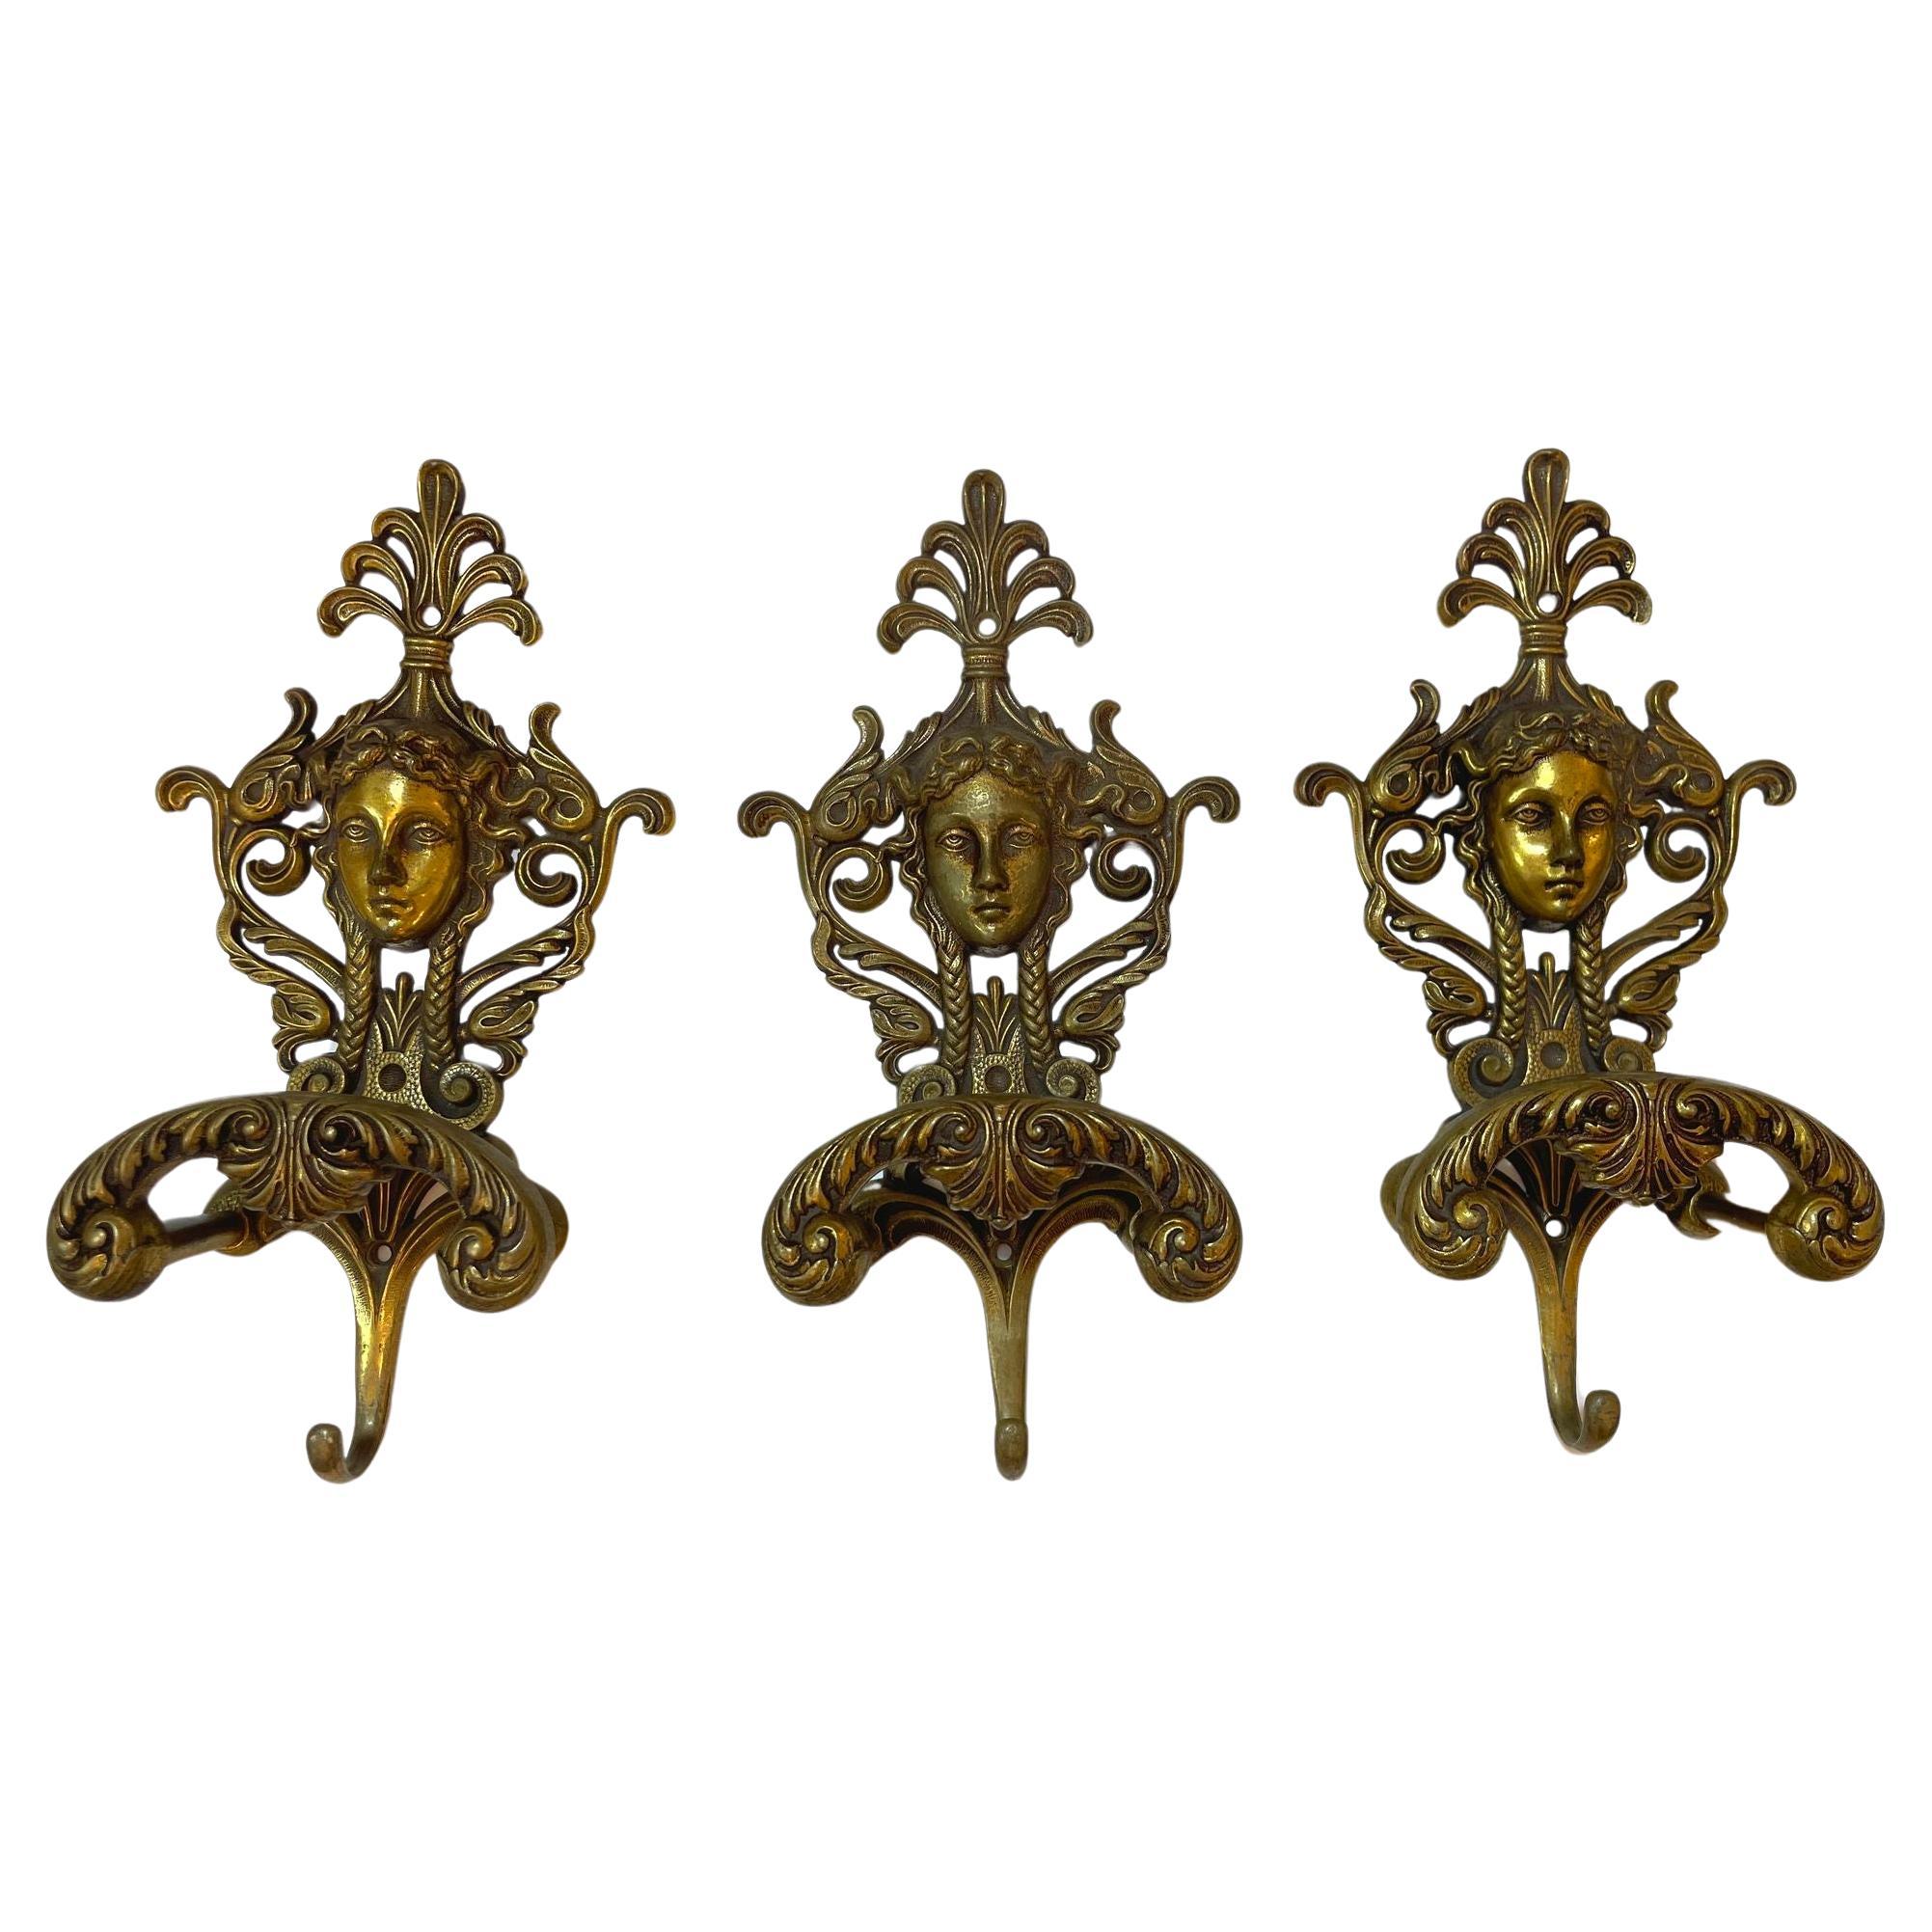 Antique Ornate Italian Figural Architectural Cast Brass Wall Hook Decor Set of 3